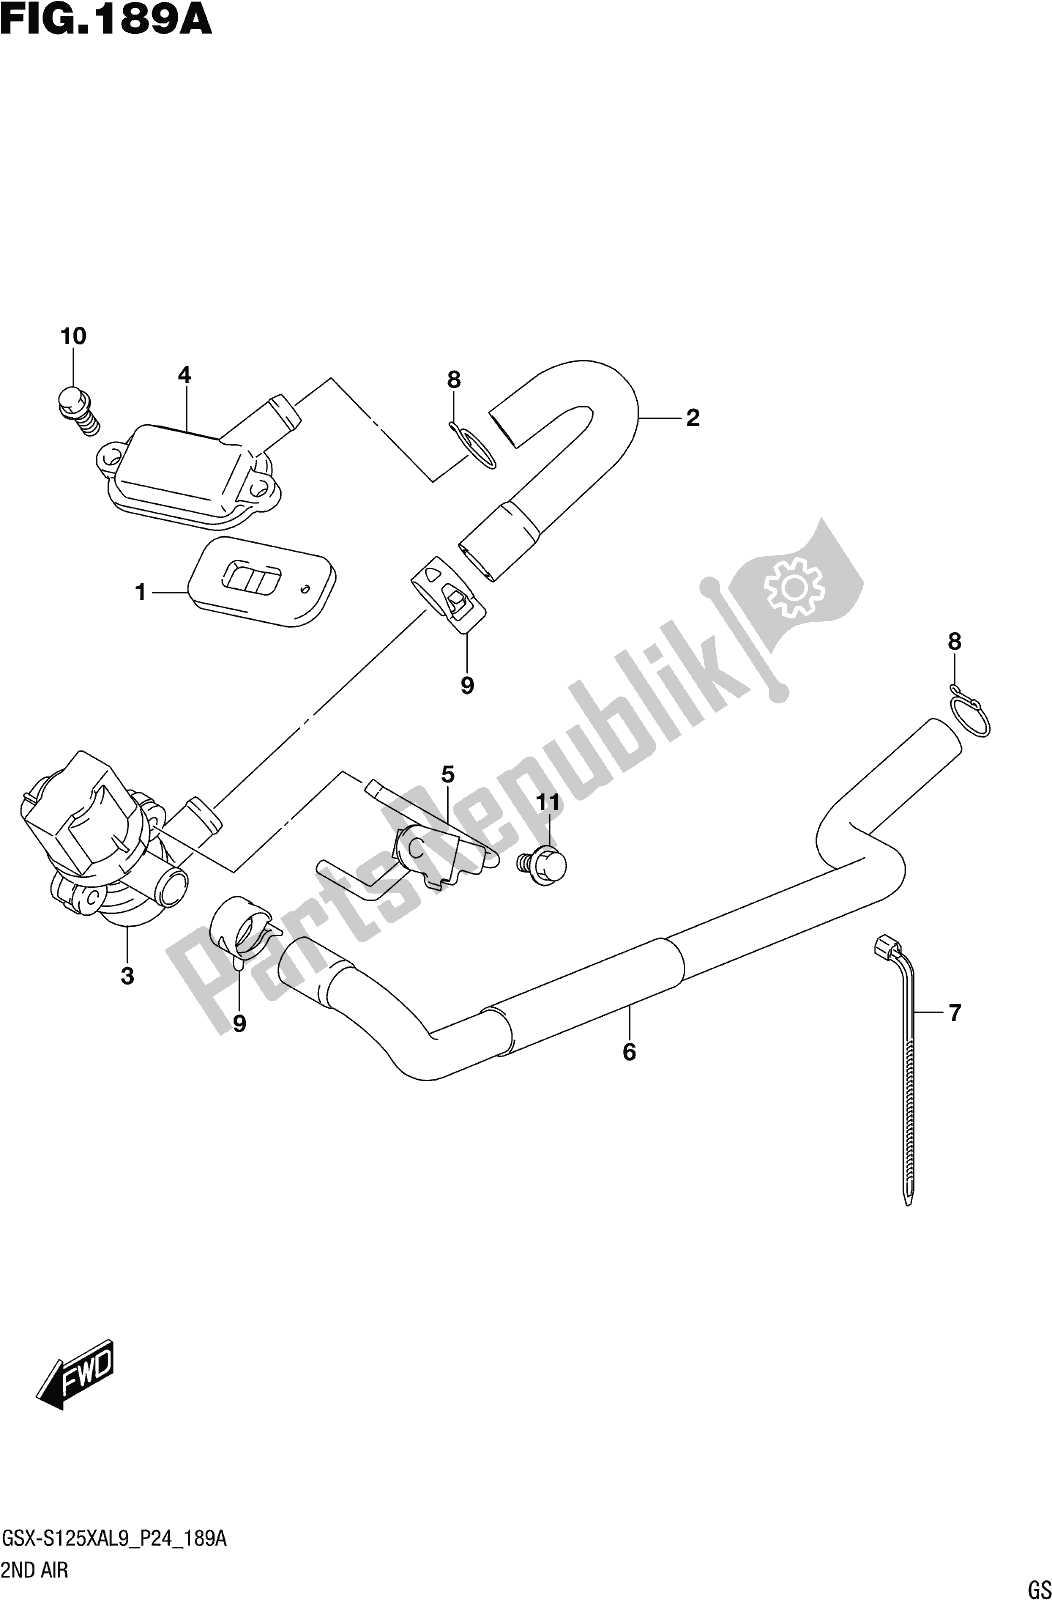 All parts for the Fig. 189a 2nd Air of the Suzuki Gsx-s 125 XA 2019